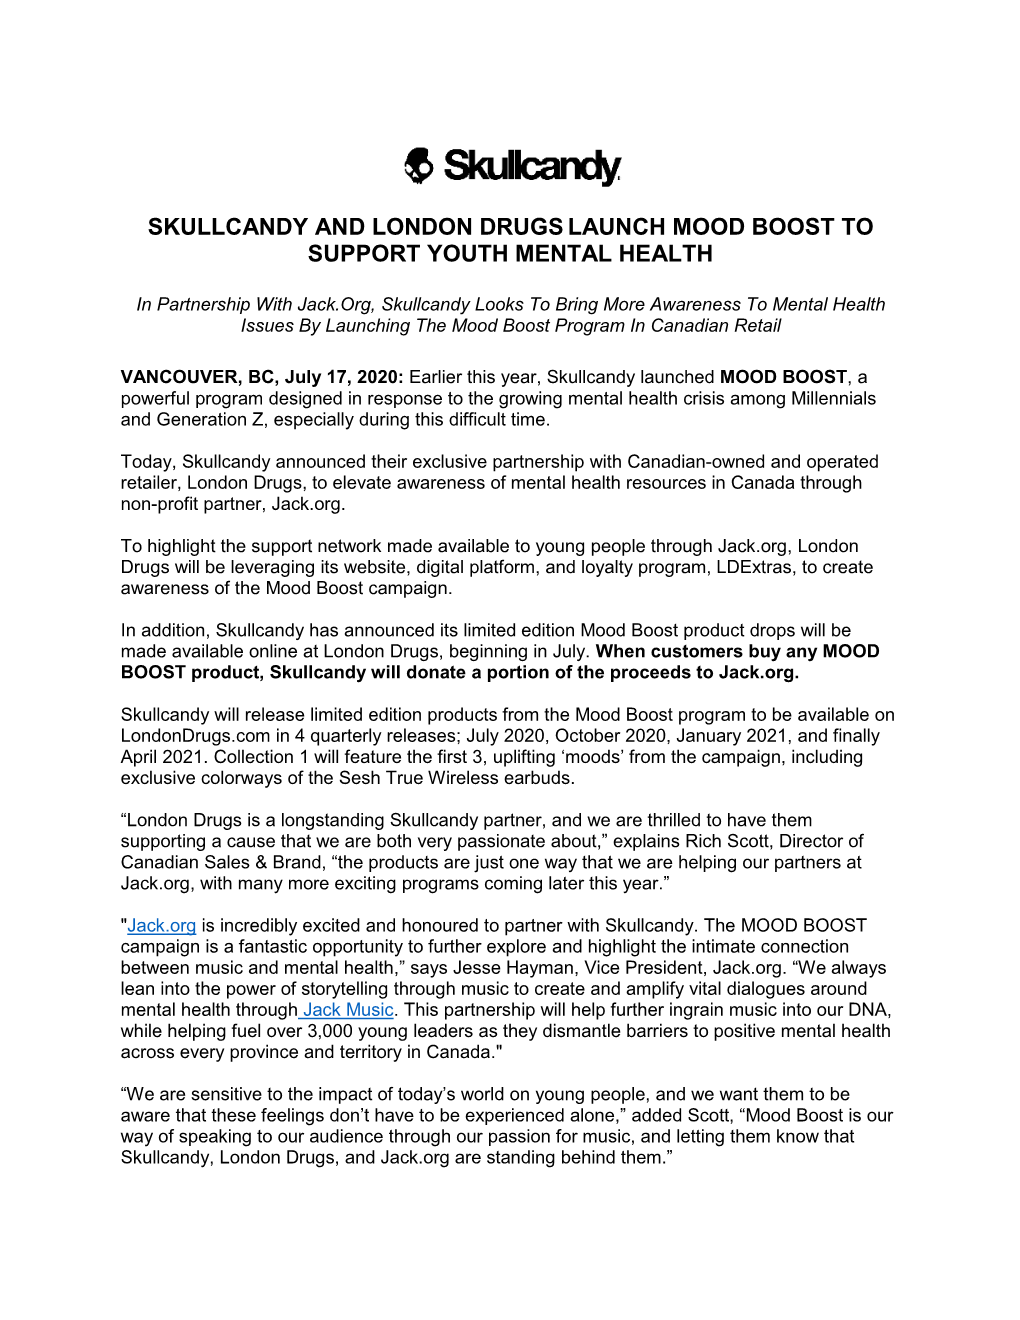 Skullcandy and London Drugs Launch Mood Boost to Support Youth Mental Health